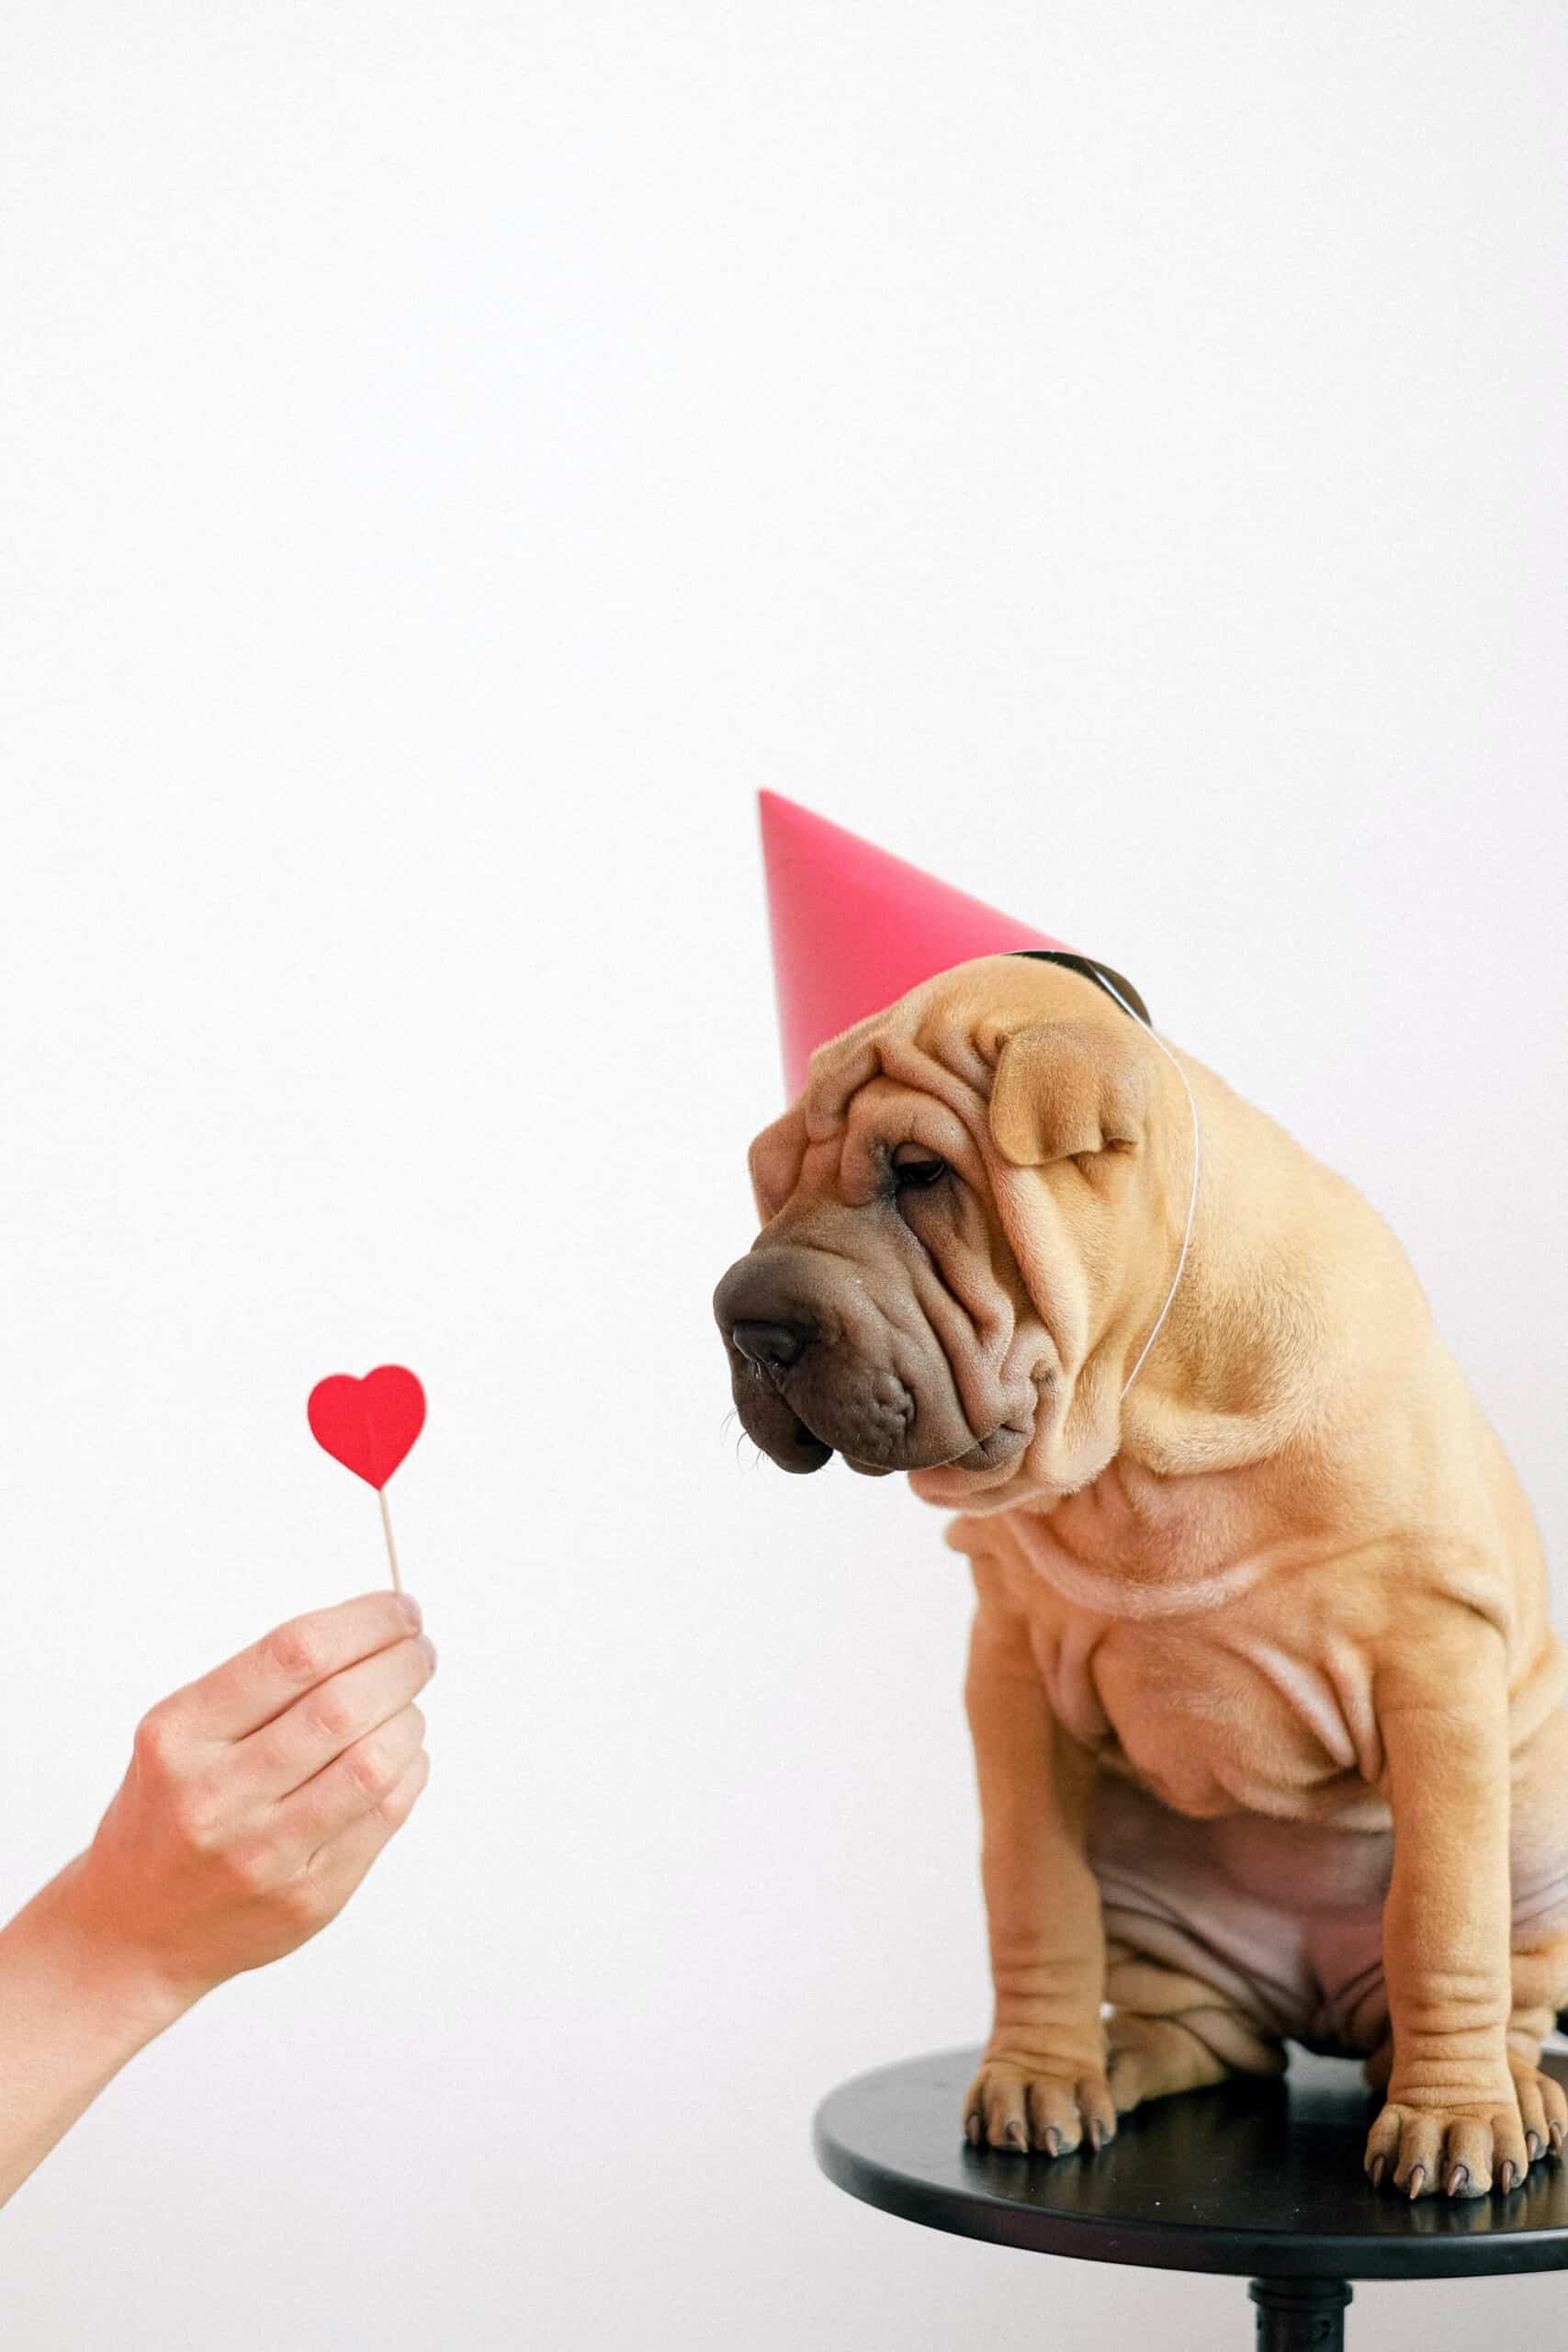 There are many ways to celebrate Valentine's Day with your pet